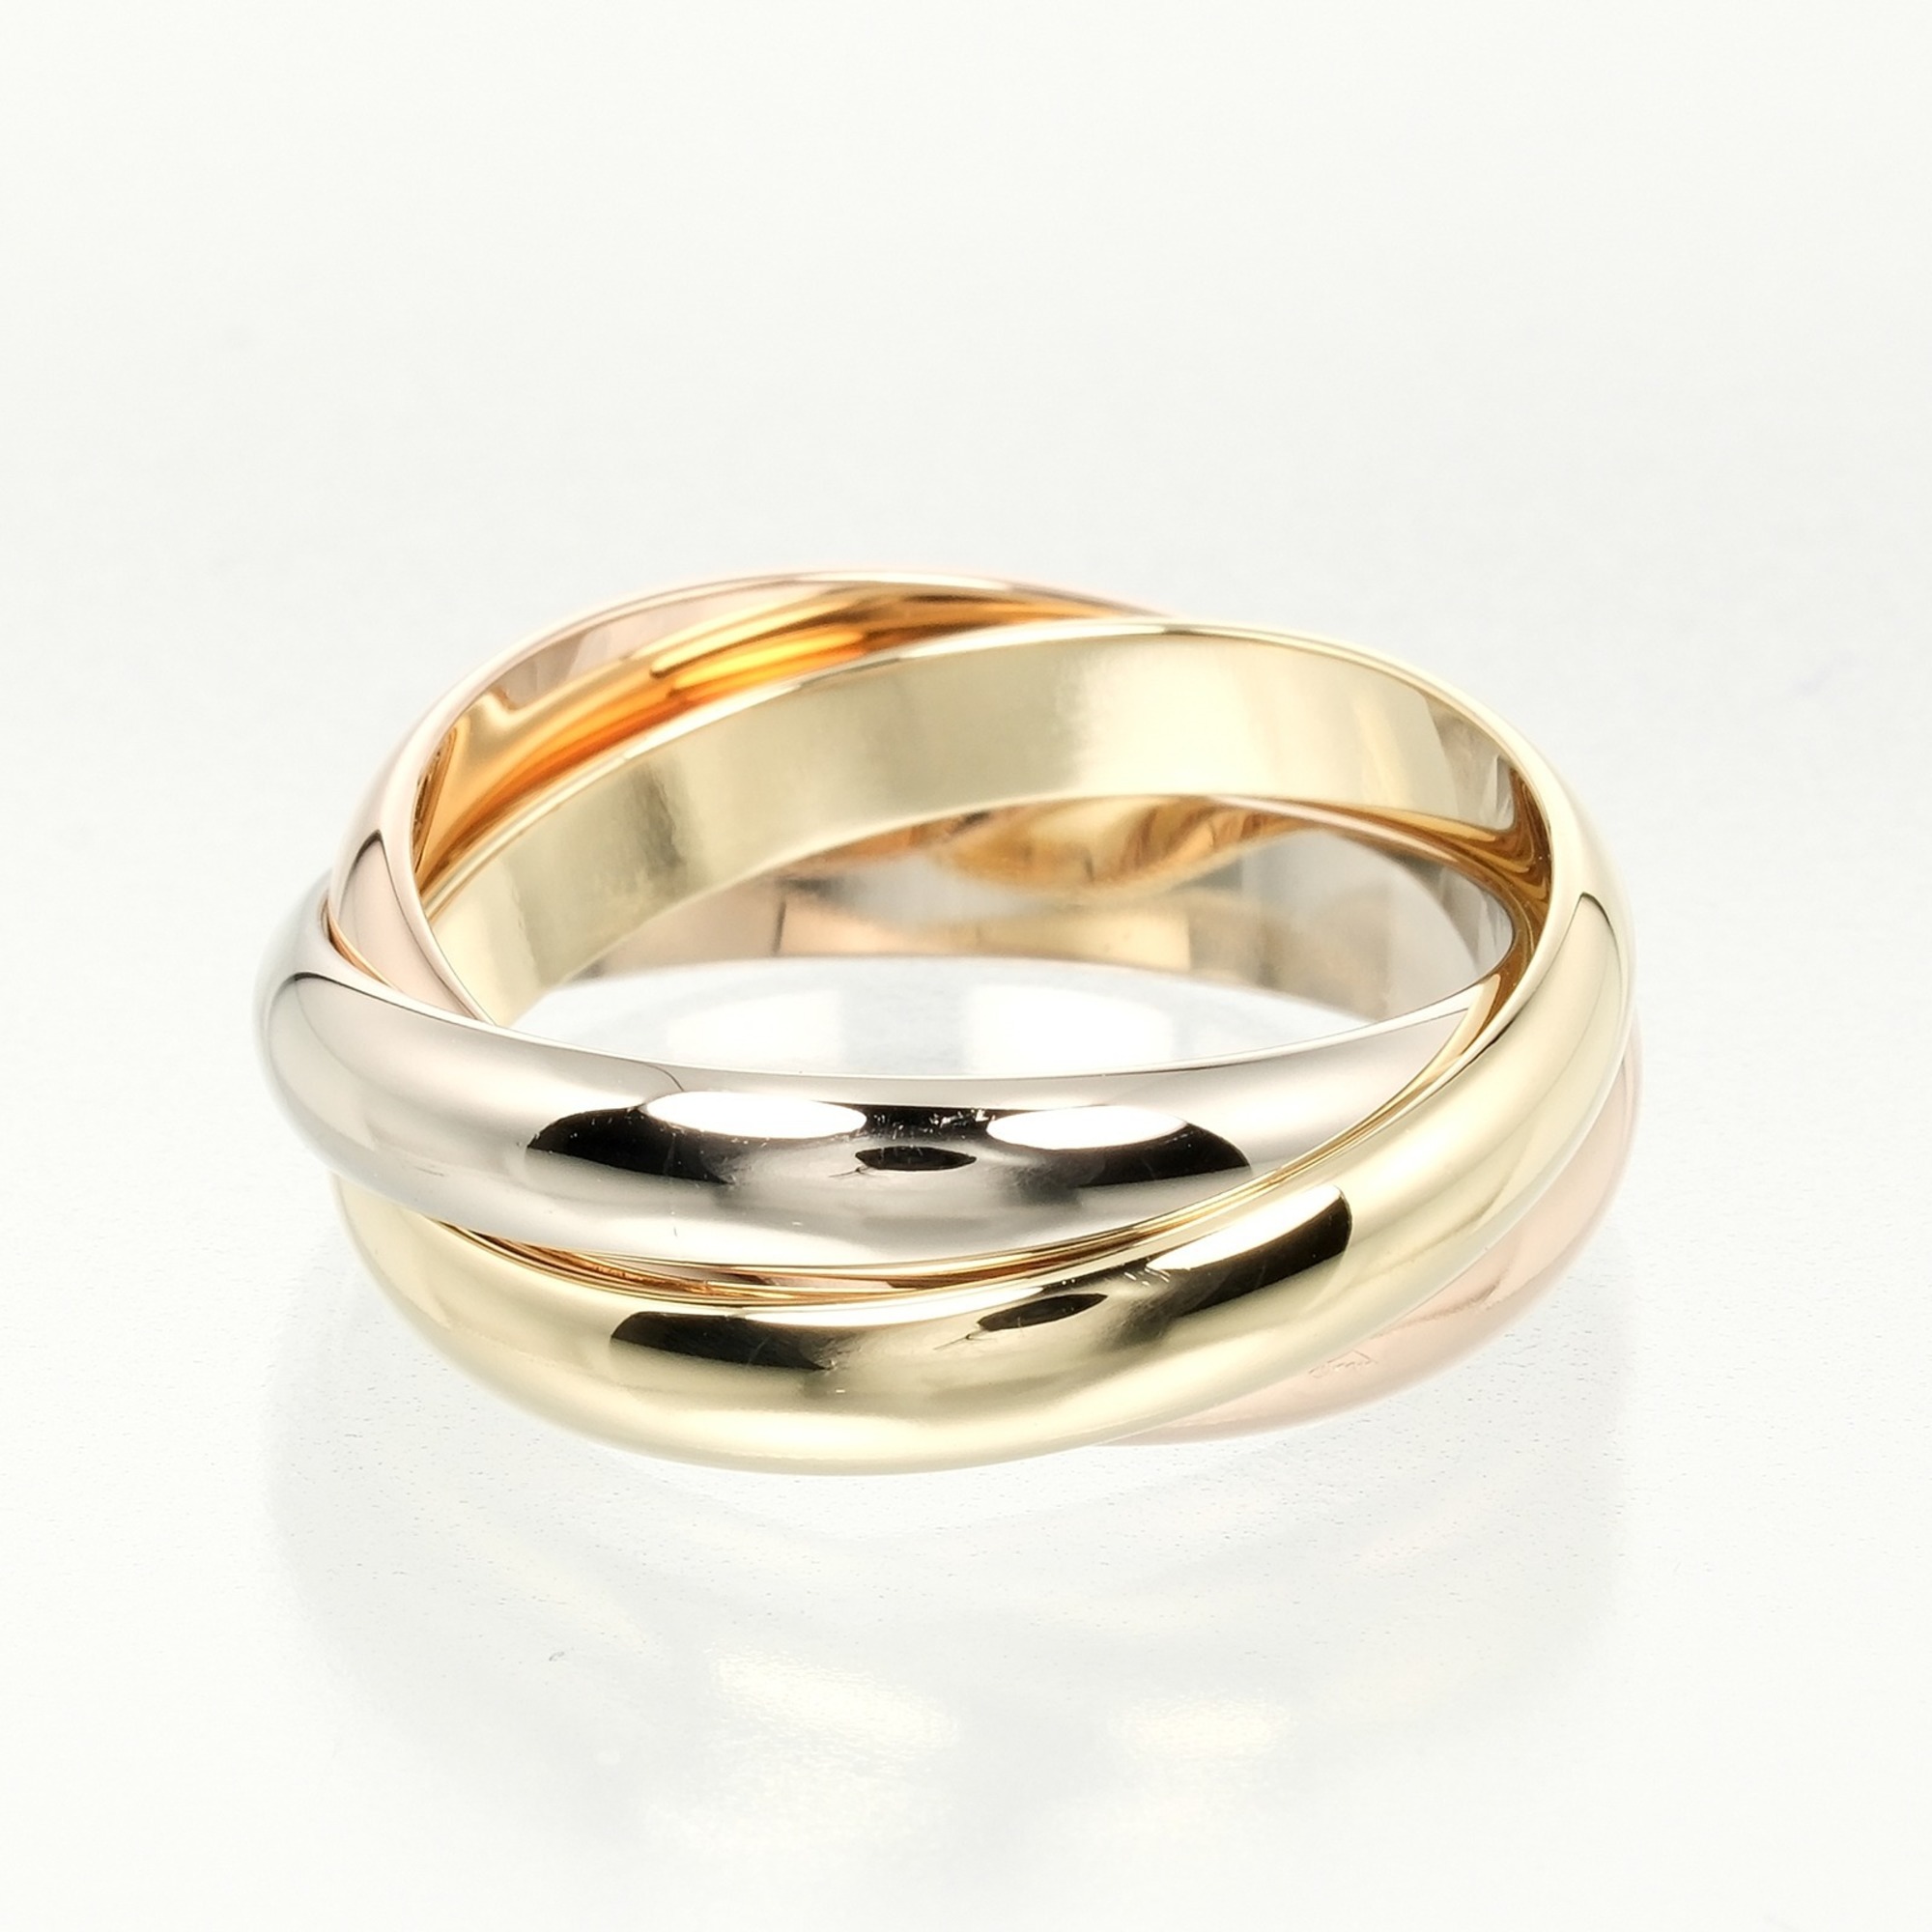 Cartier Trinity Ring, size 14, K18 gold, YG, PG, WG, approx. 8.61g, I122924041